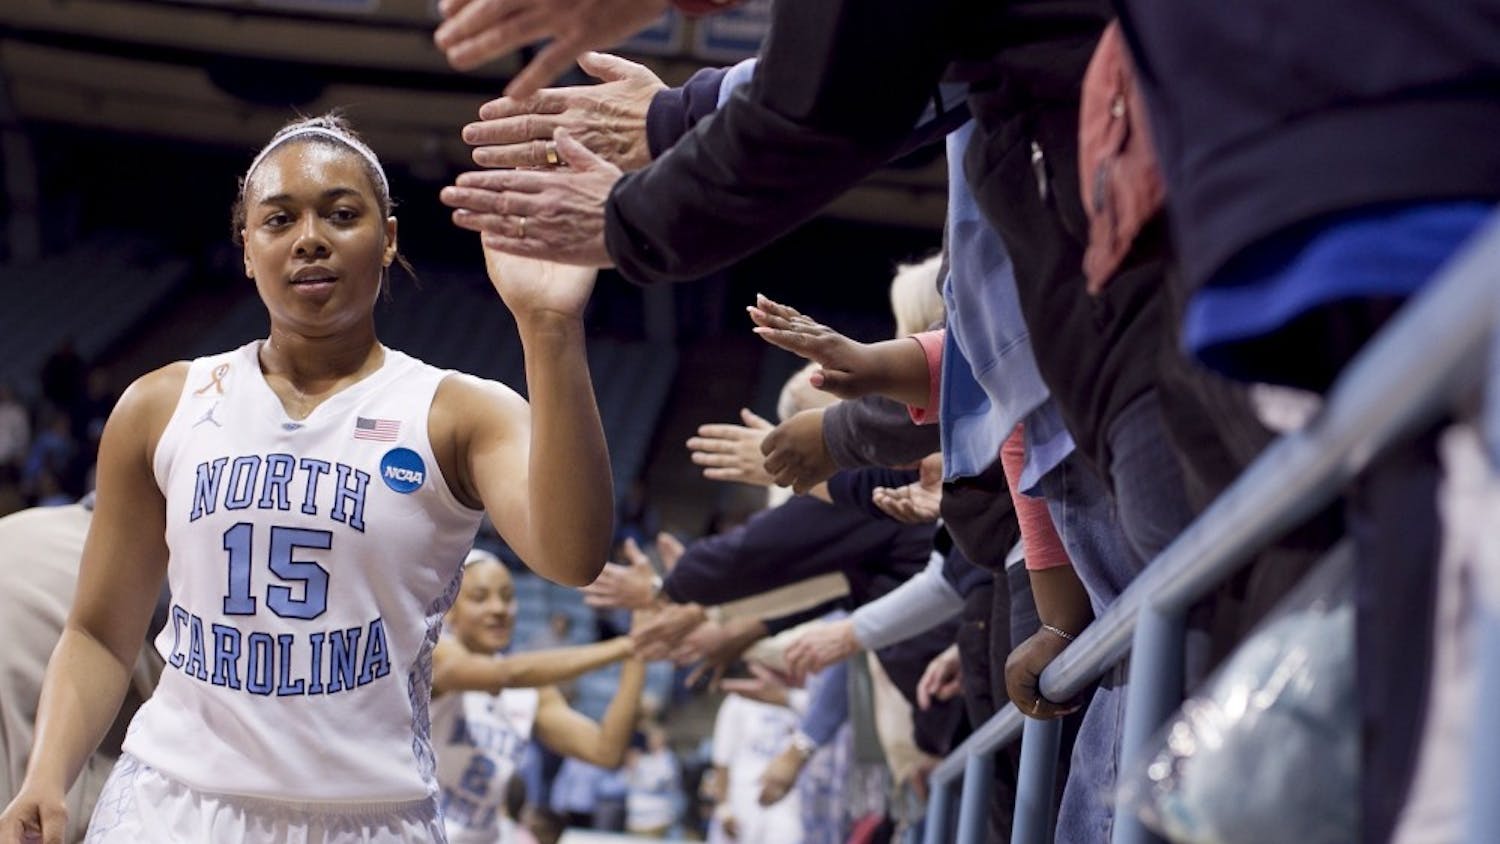 North Carolina's Allisha Gray (15) celebrates the Tar Heels' 62-53 victory over the Michigan State Spartans during the second round of the NCAA Tournament at Carmichael Arena in Chapel Hill, N.C., on Tuesday, March 25, 2014. (Robert Willett/Raleigh News & Observer/MCT)